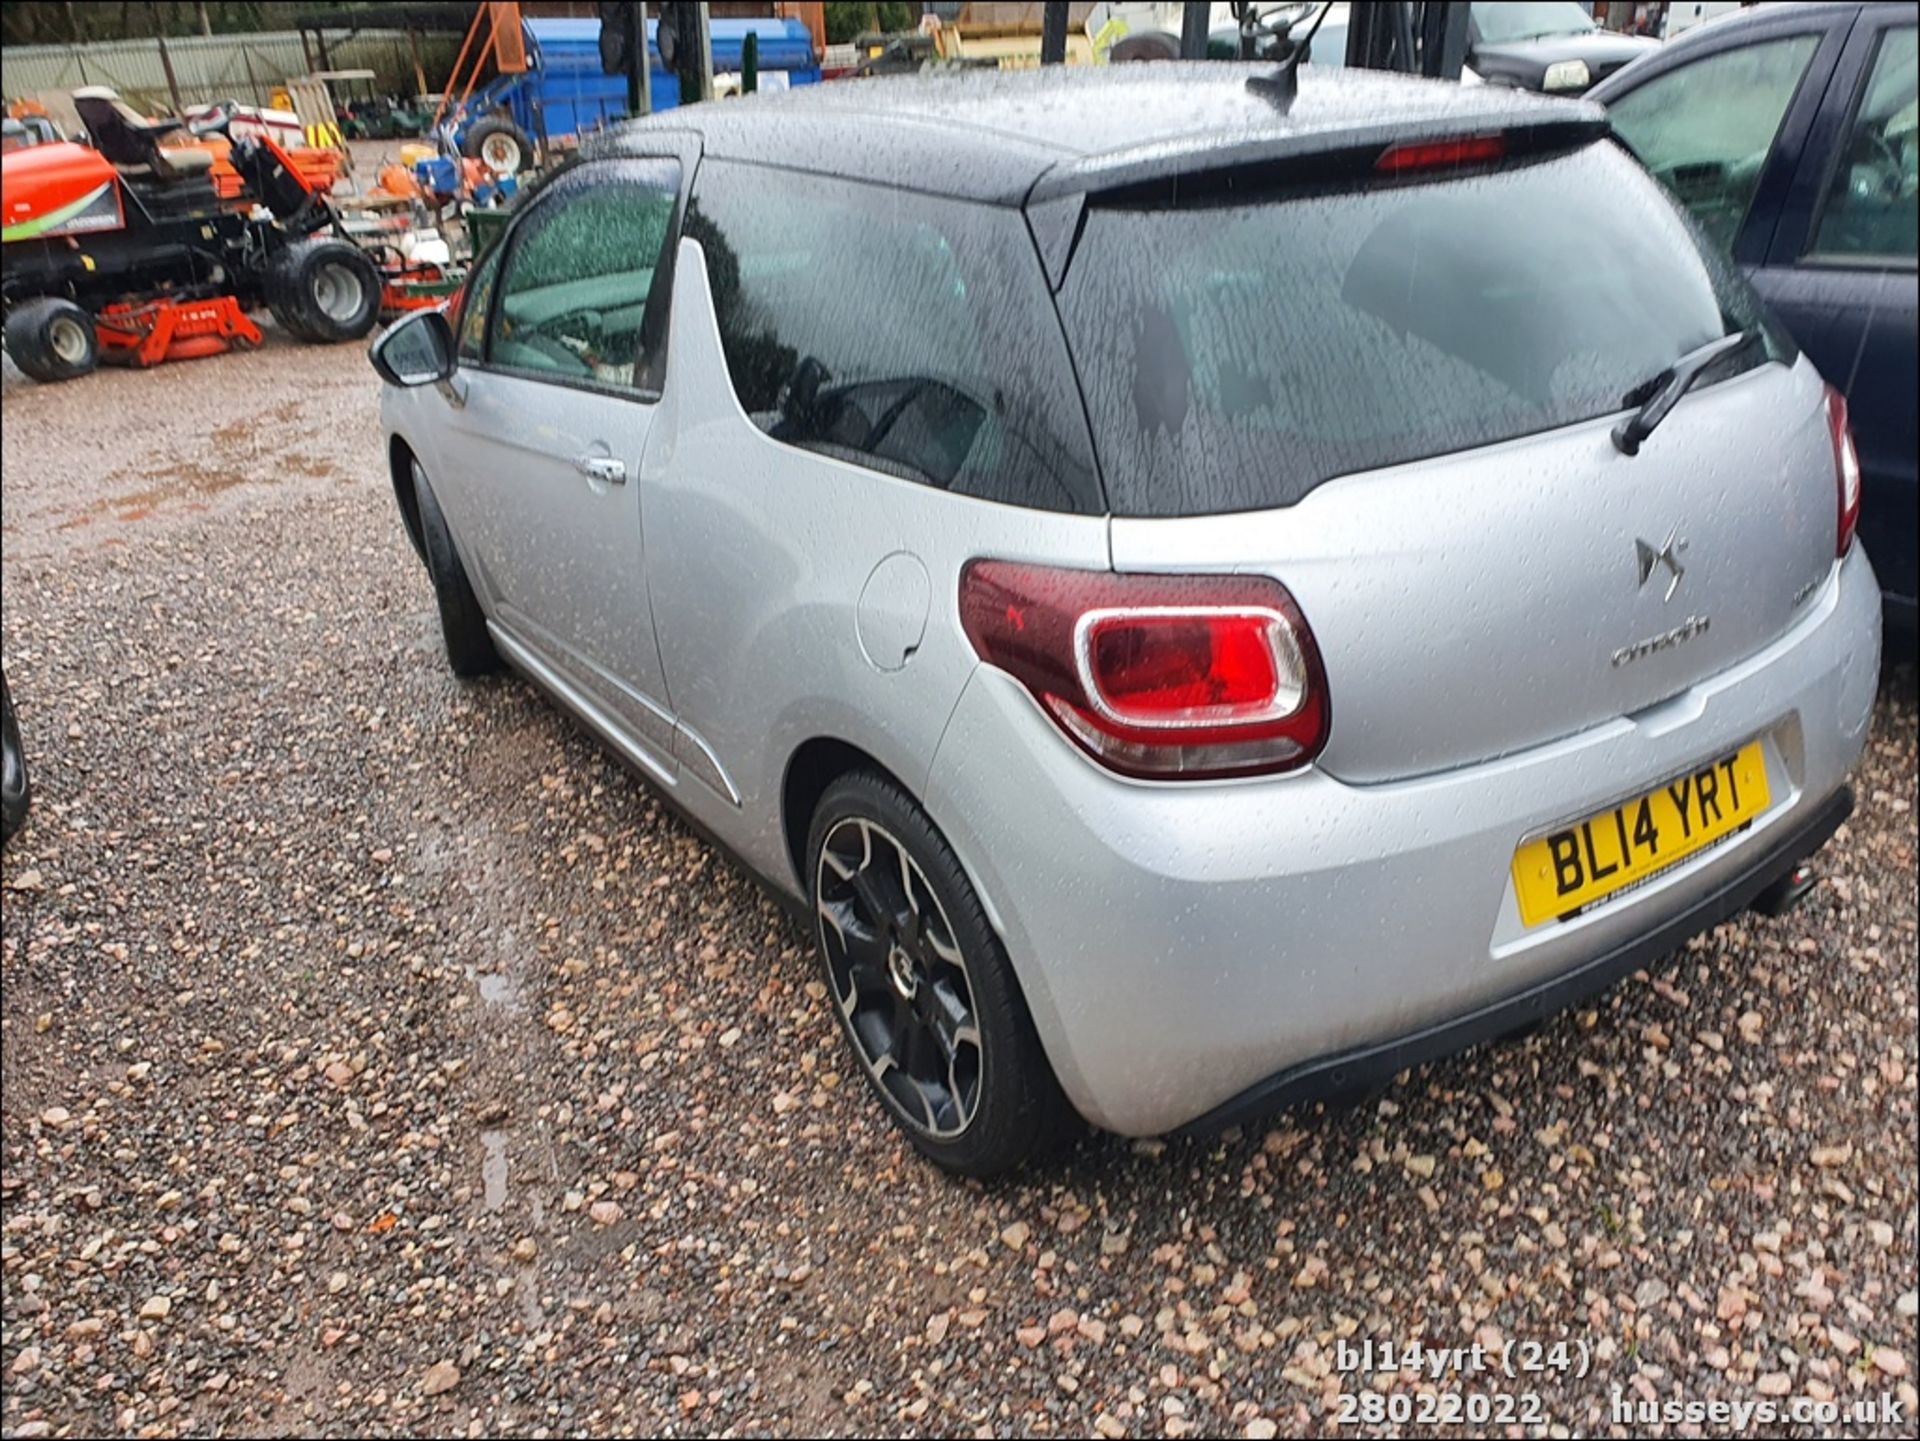 14/14 CITROEN DS3 DSTYLE + E-HDI - 1560cc 3dr Hatchback (Silver, 122k) - Image 24 of 25